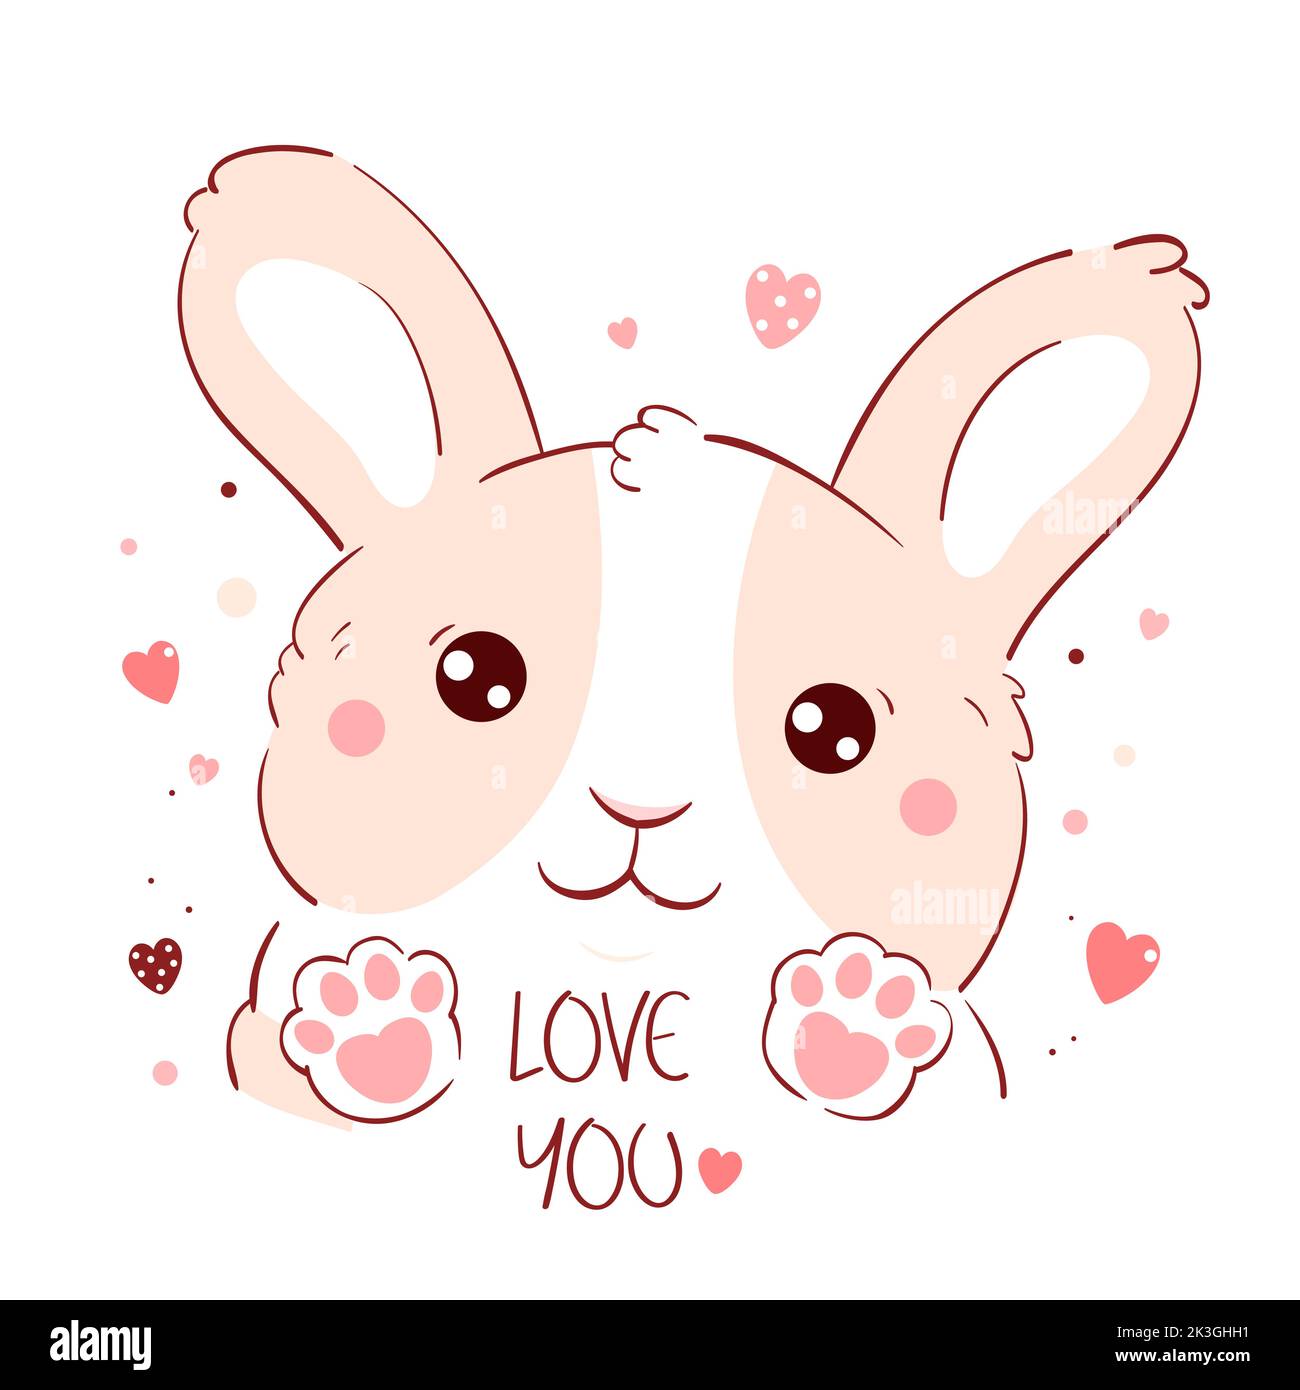 Cute Valentine card in kawaii style. Lovely bunny with pink hearts. Inscription Love you. Can be used for t-shirt print, stickers, greeting card desig Stock Vector